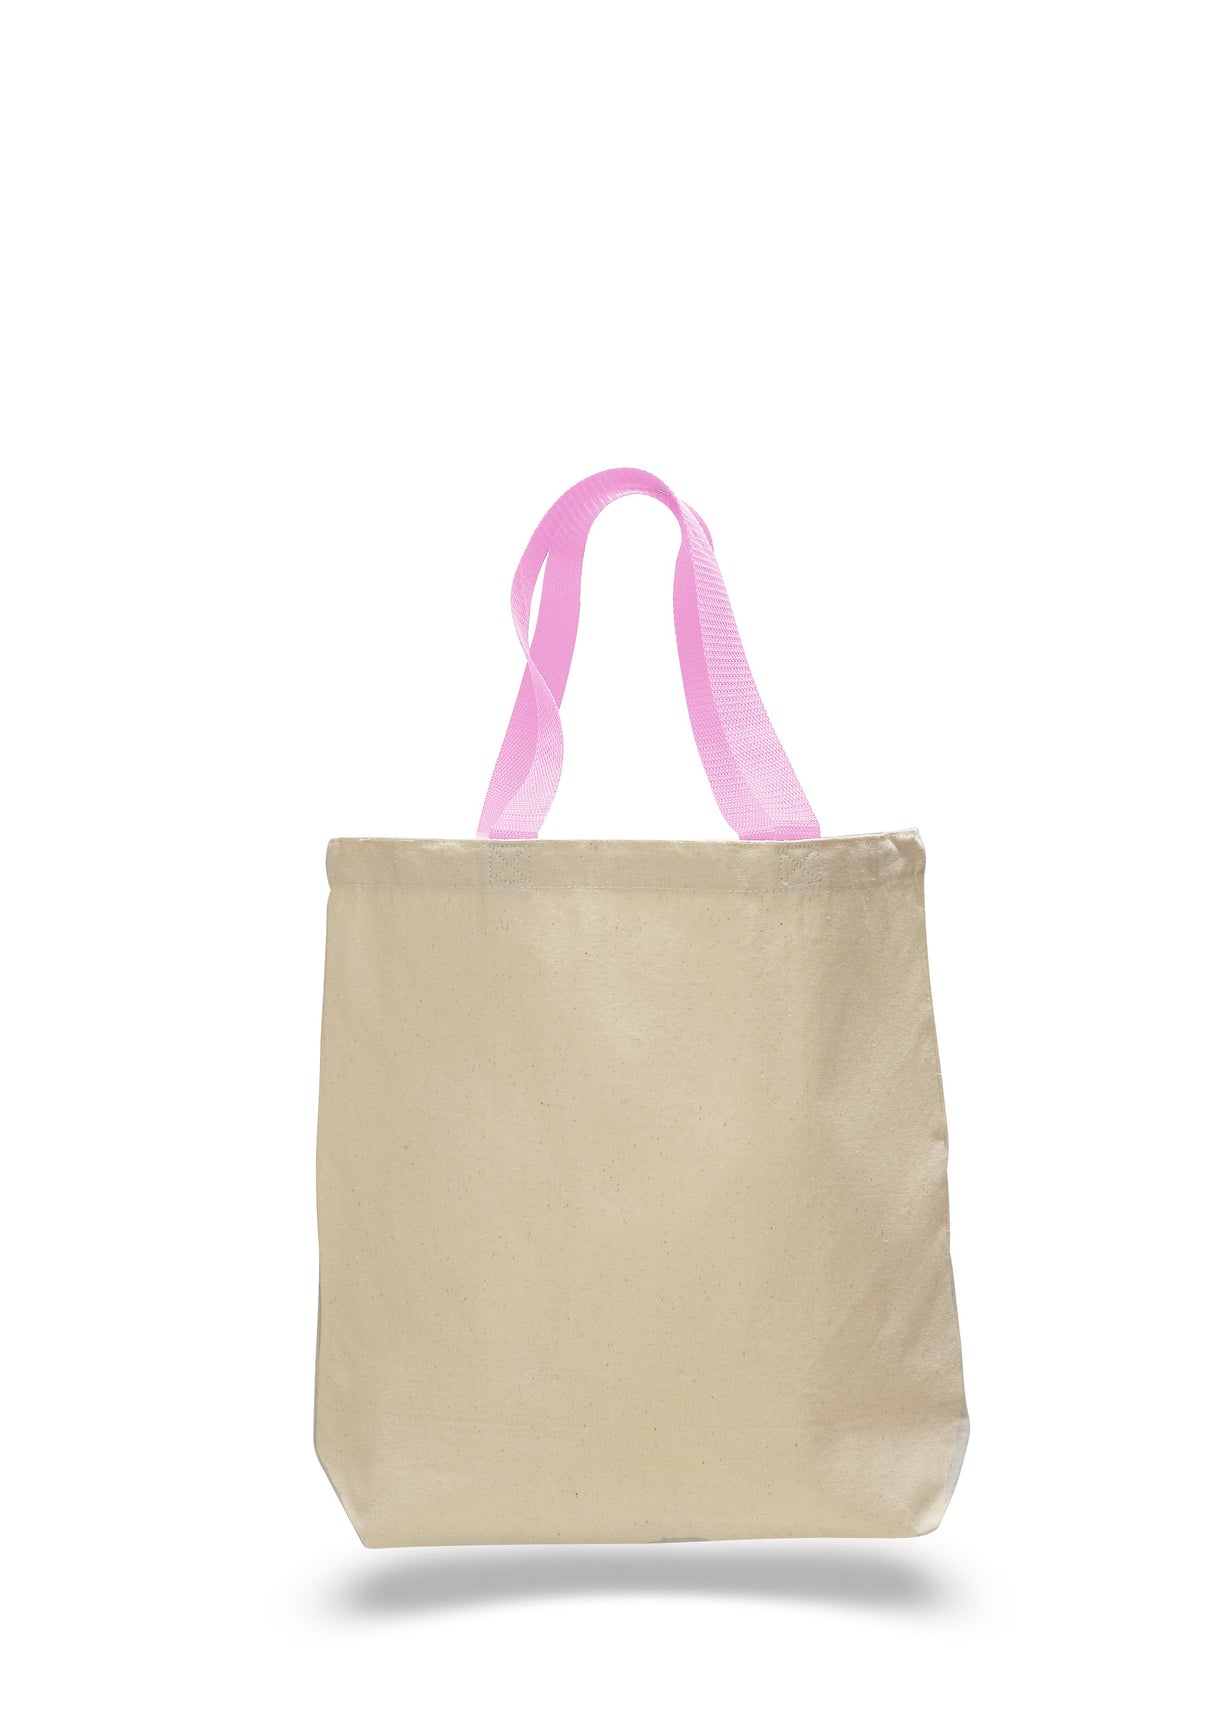 12 ct 100% Cotton Canvas Tote Bags with Color Handles - By Dozen